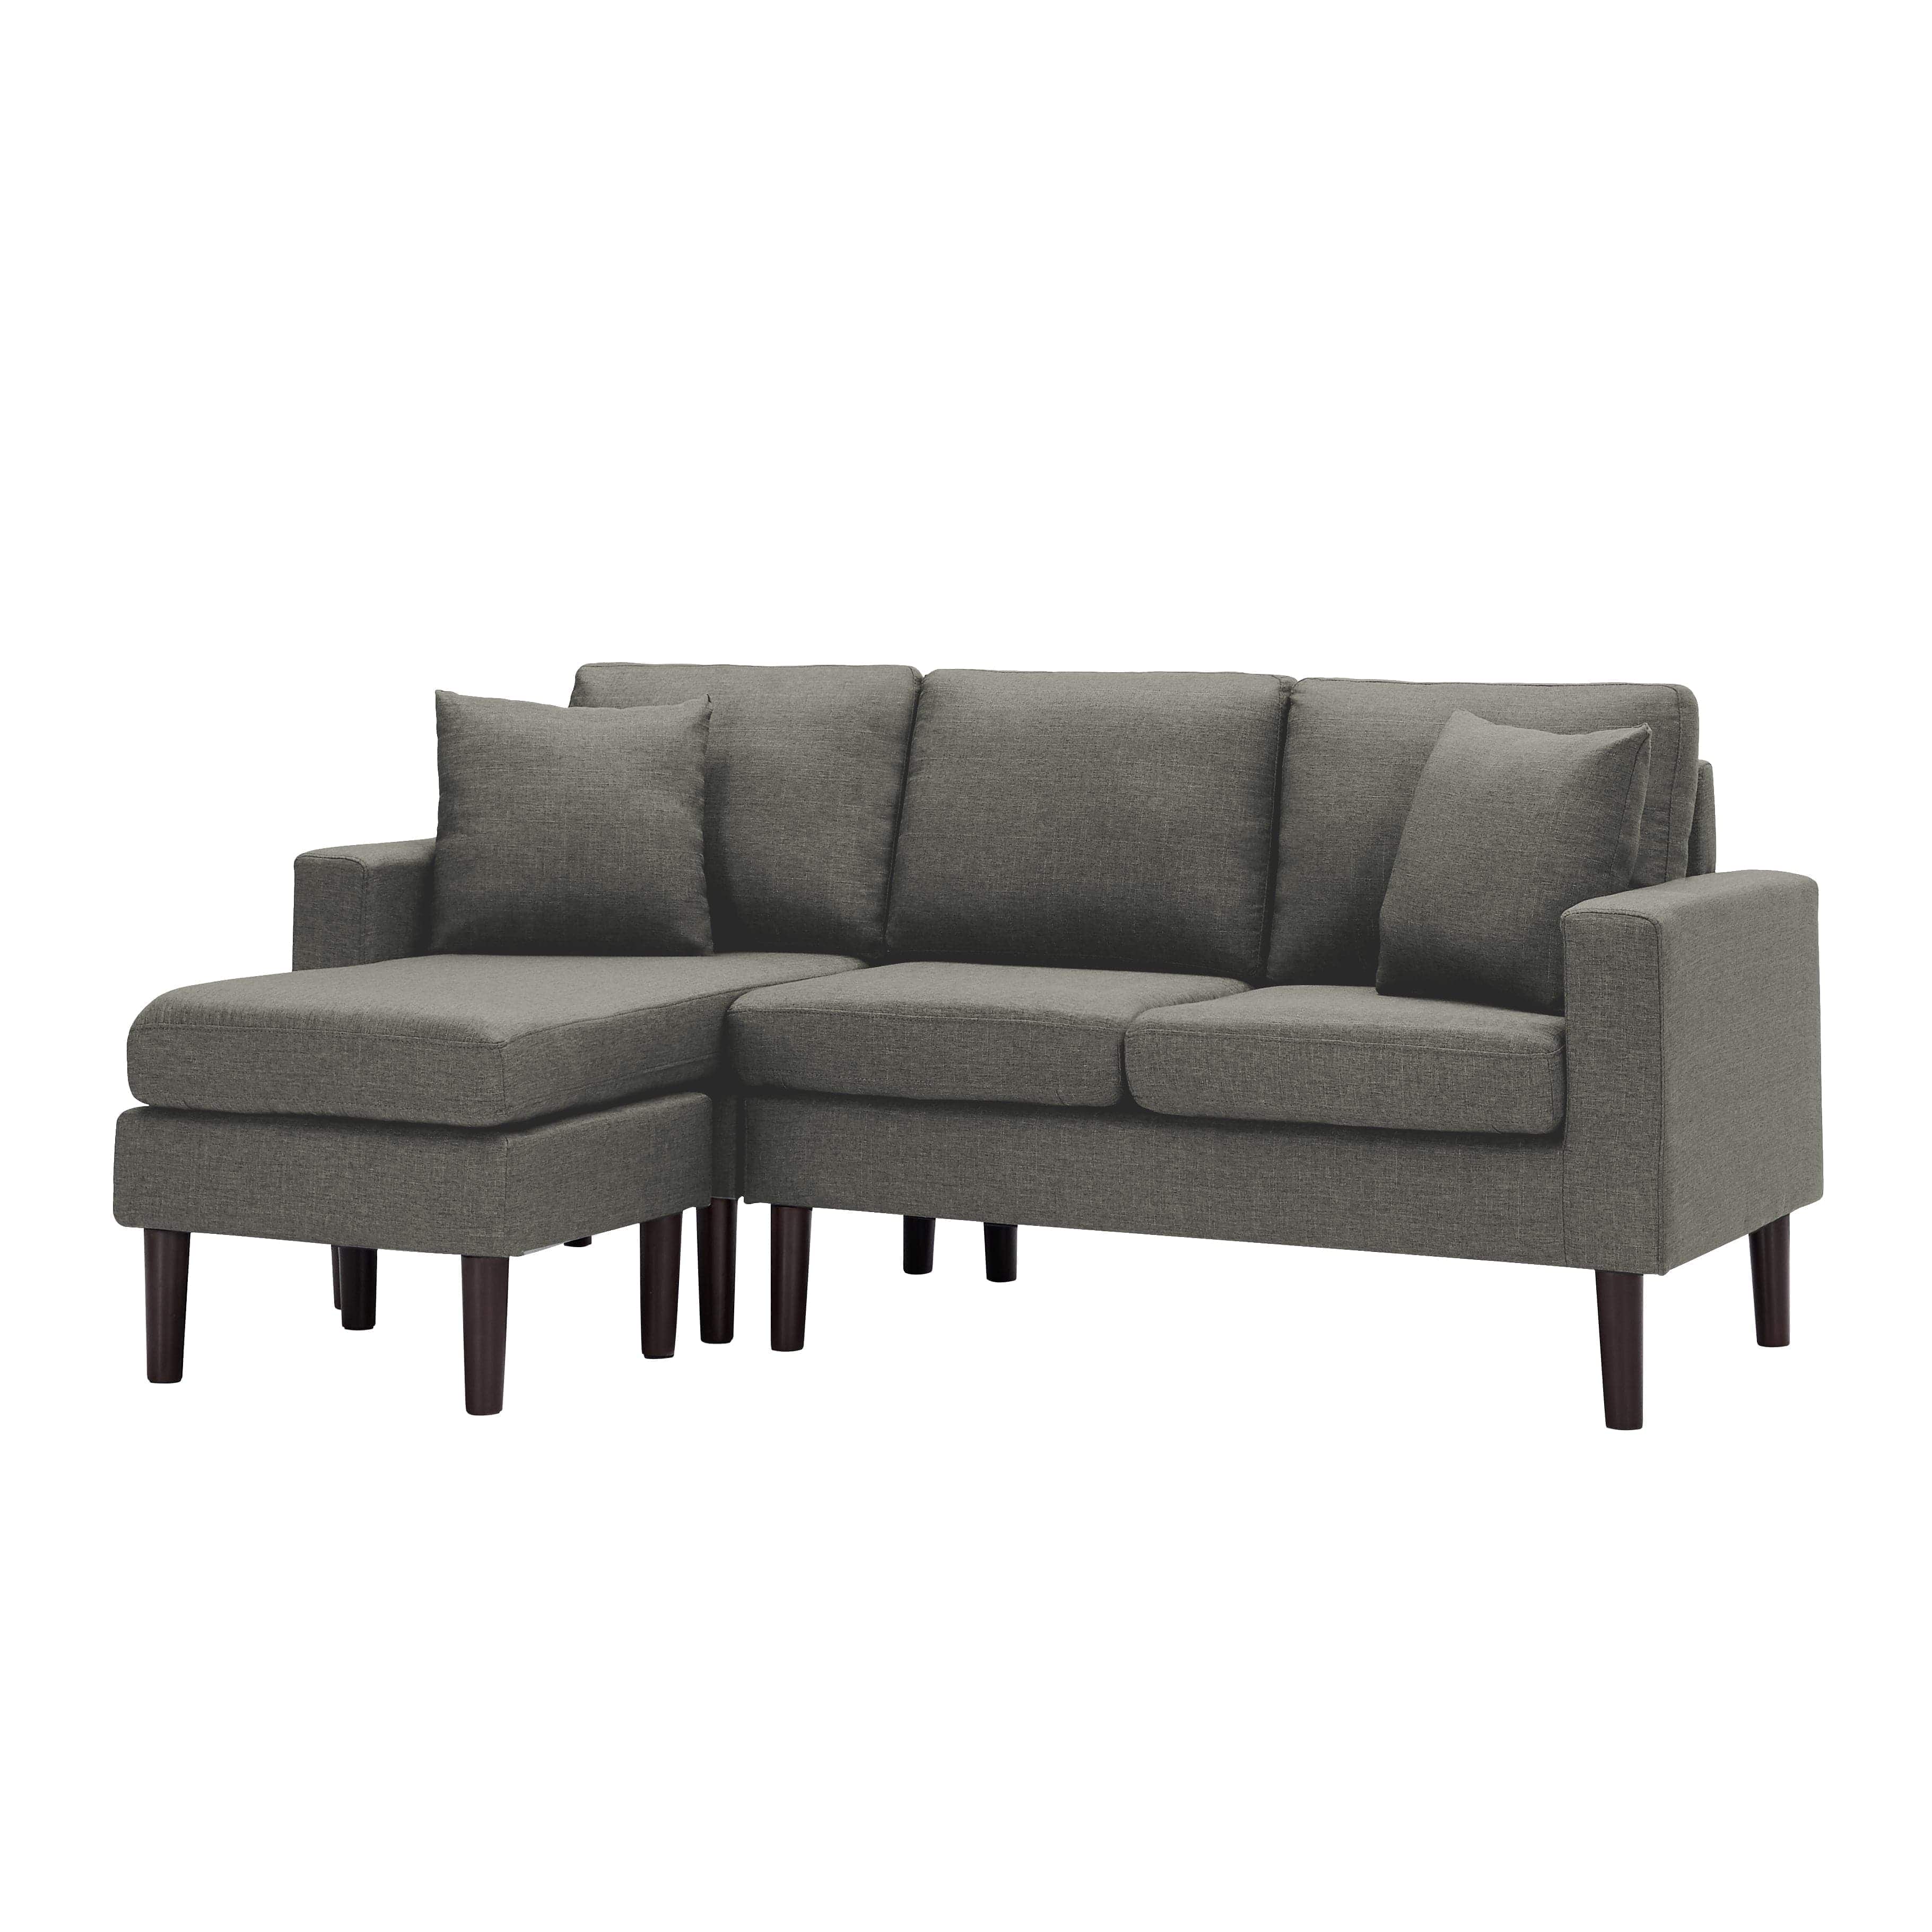 - TFC&H Co. 72" SECTIONAL SOFA LEFT HAND FACING WITH 2 PILLOWS FABRIC- Ships from The US - sectional at TFC&H Co.